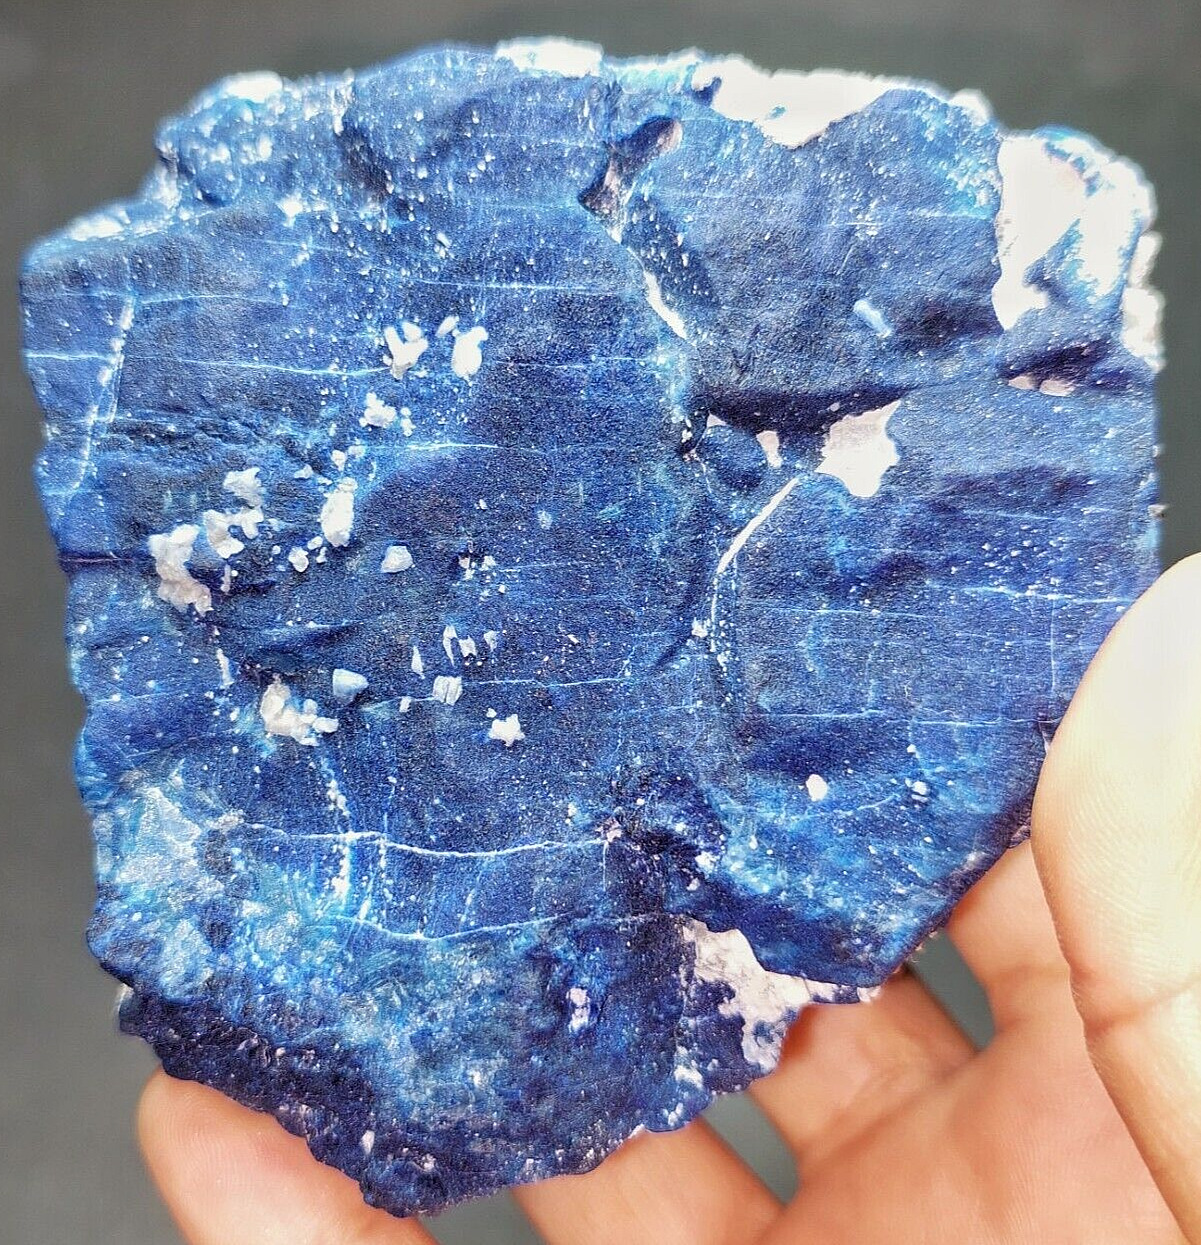 Lazurite Specimen from Badakhshan, Afghanistan - Authentic Natural Mineral Piece